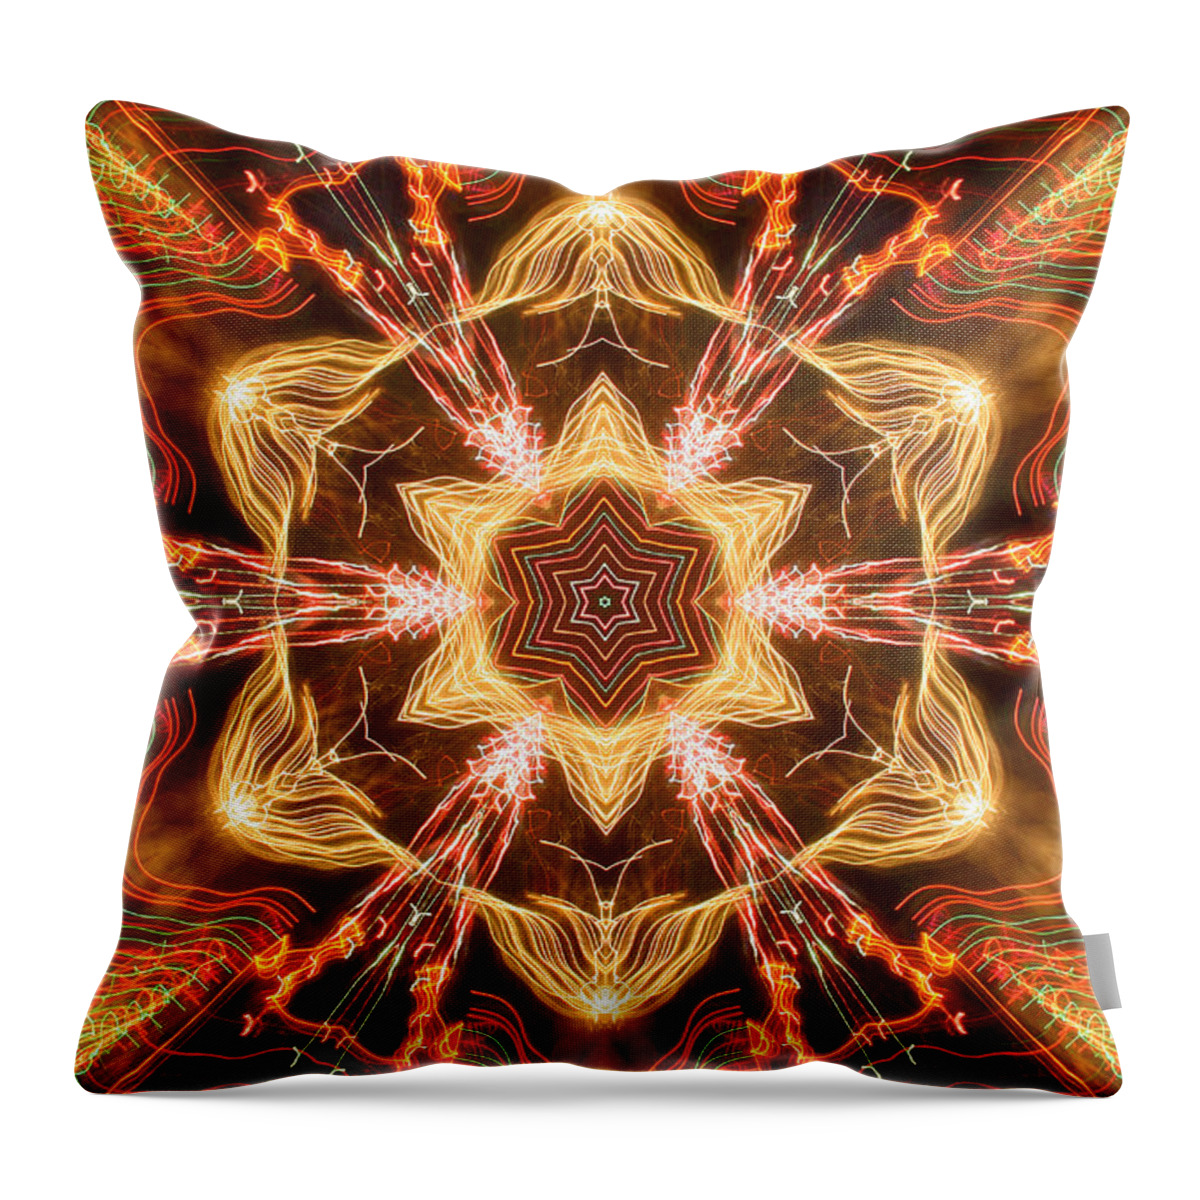 Mandala Throw Pillow featuring the painting Starbright Mandala by Wernher Krutein